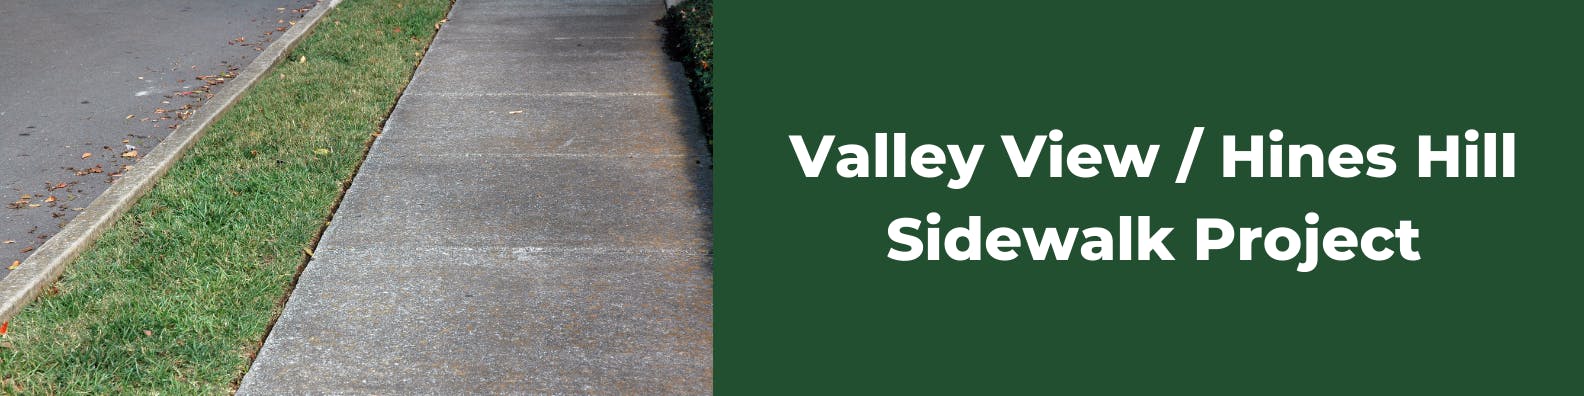 Valley View / Hines Hill Sidewalk Project